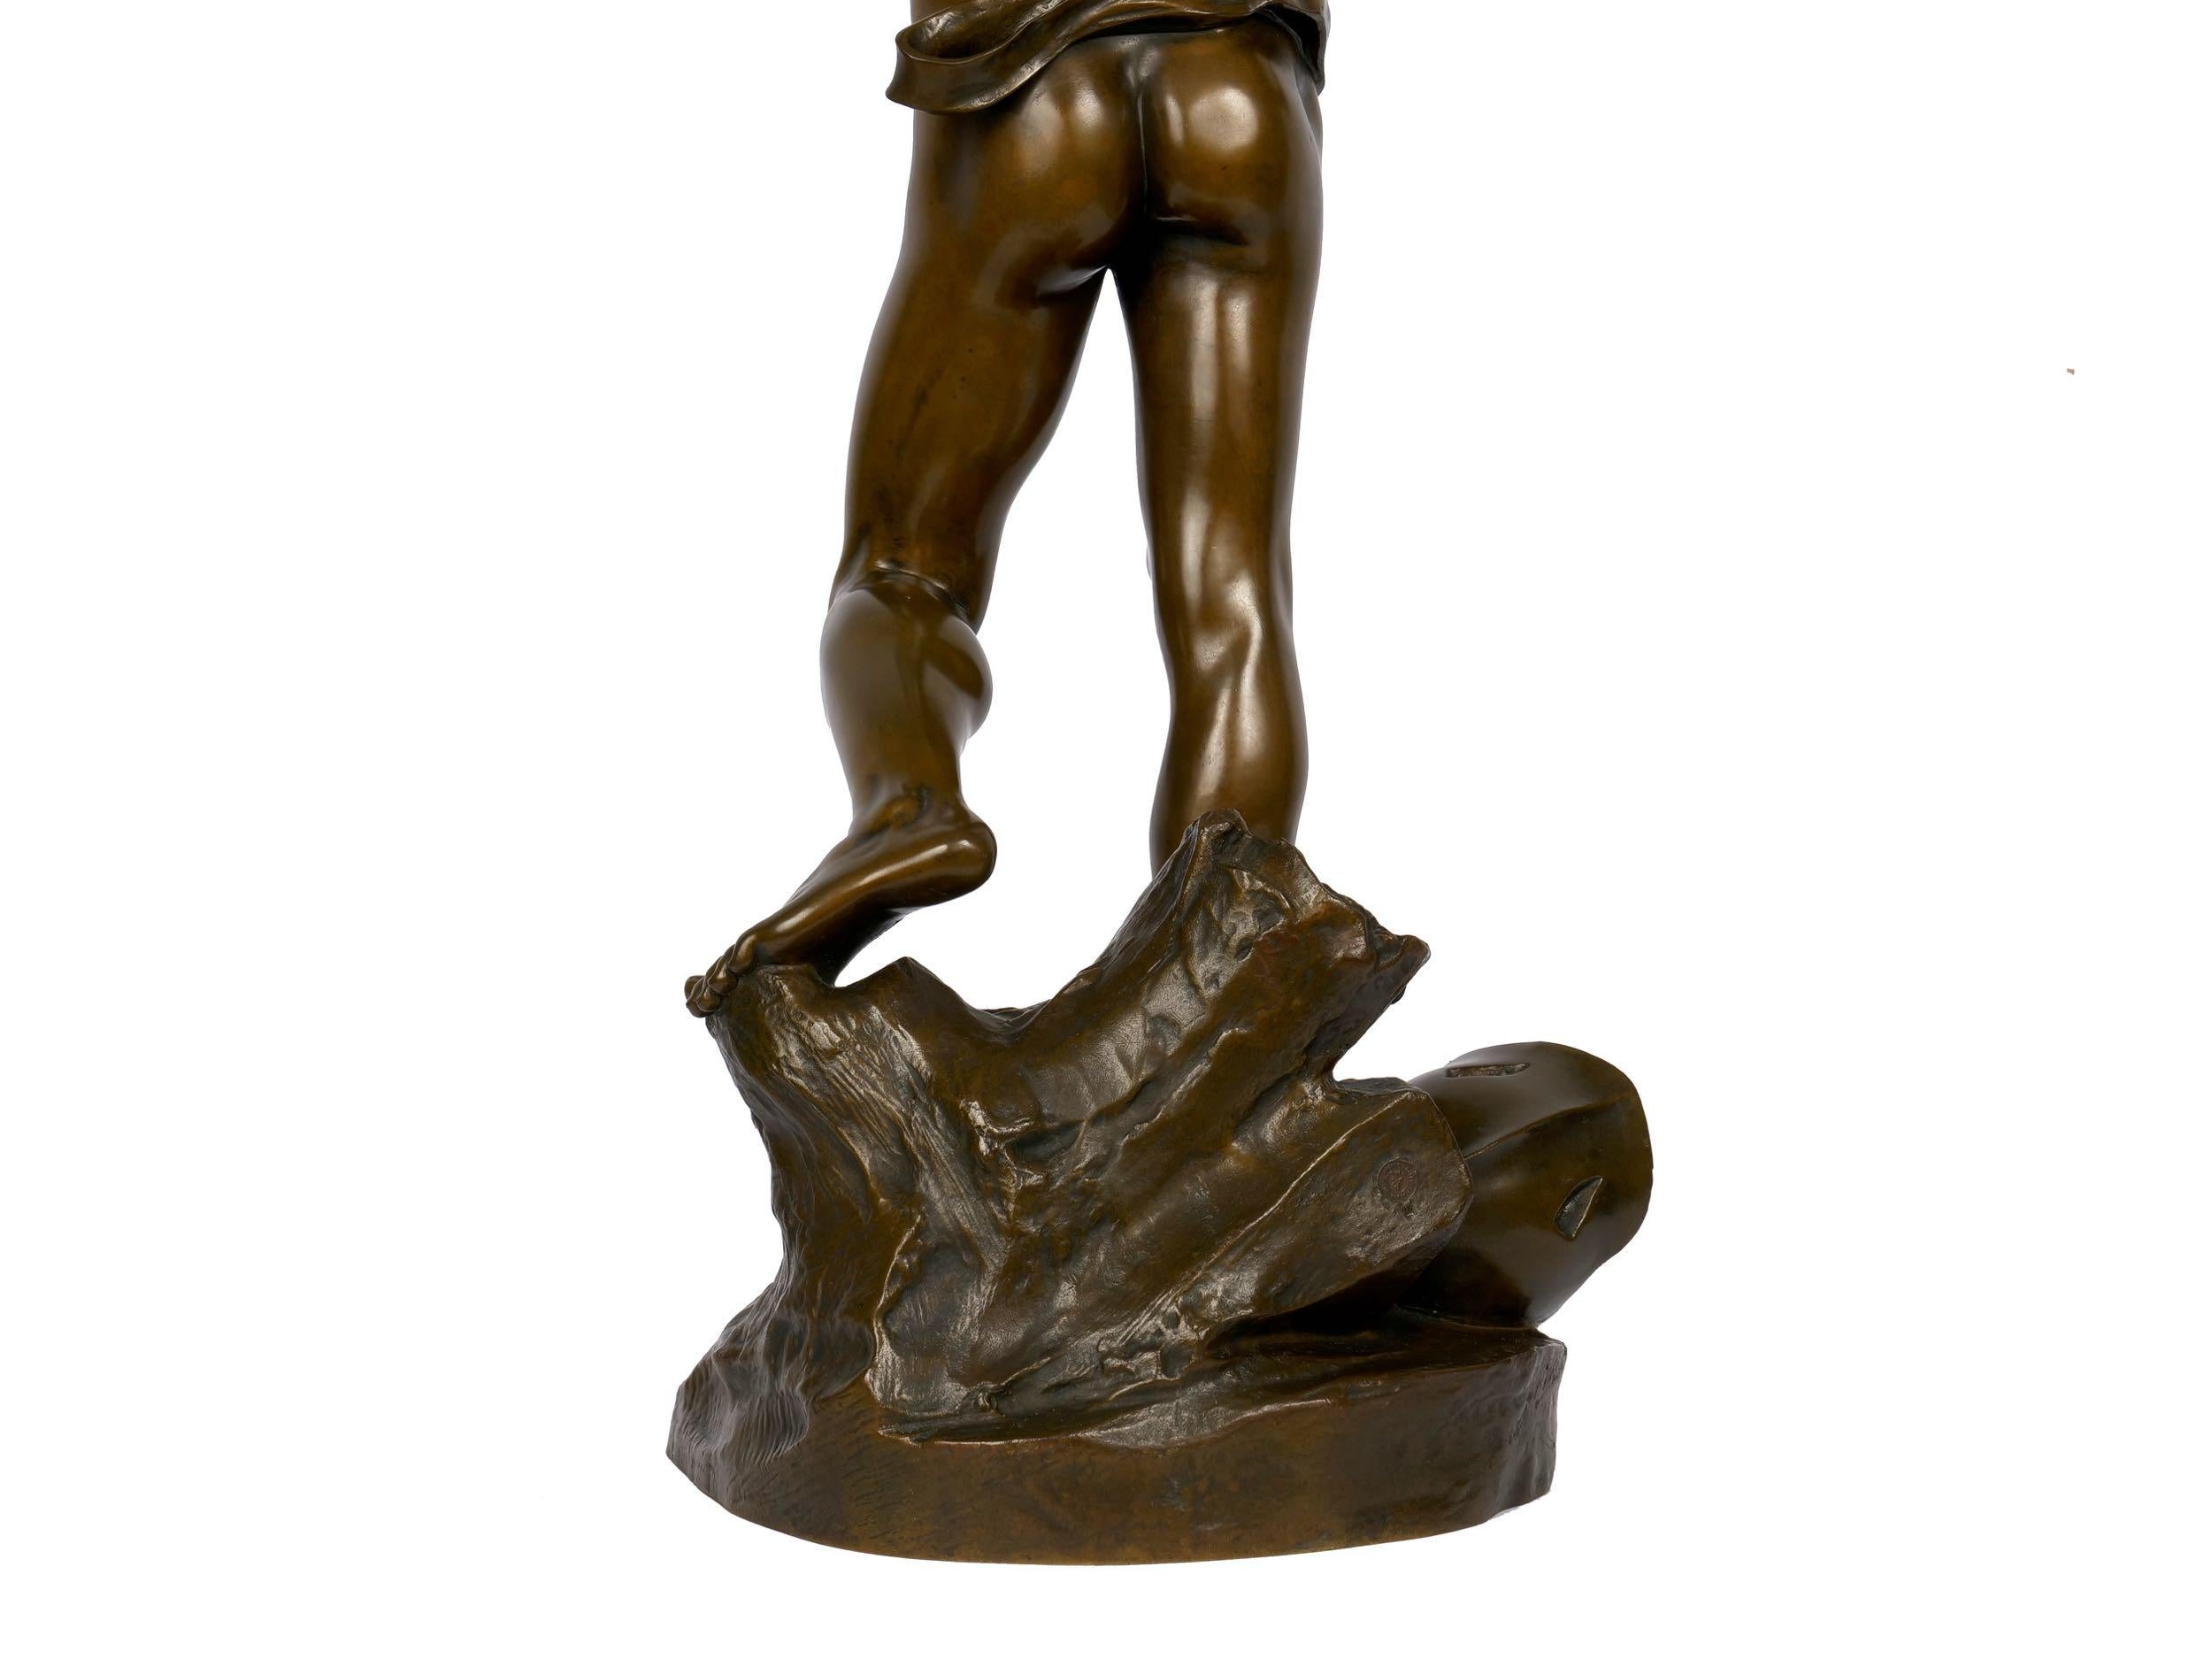 “Jason and the Golden Fleece” '1875' French Bronze Sculpture by Lanson & Susse 5